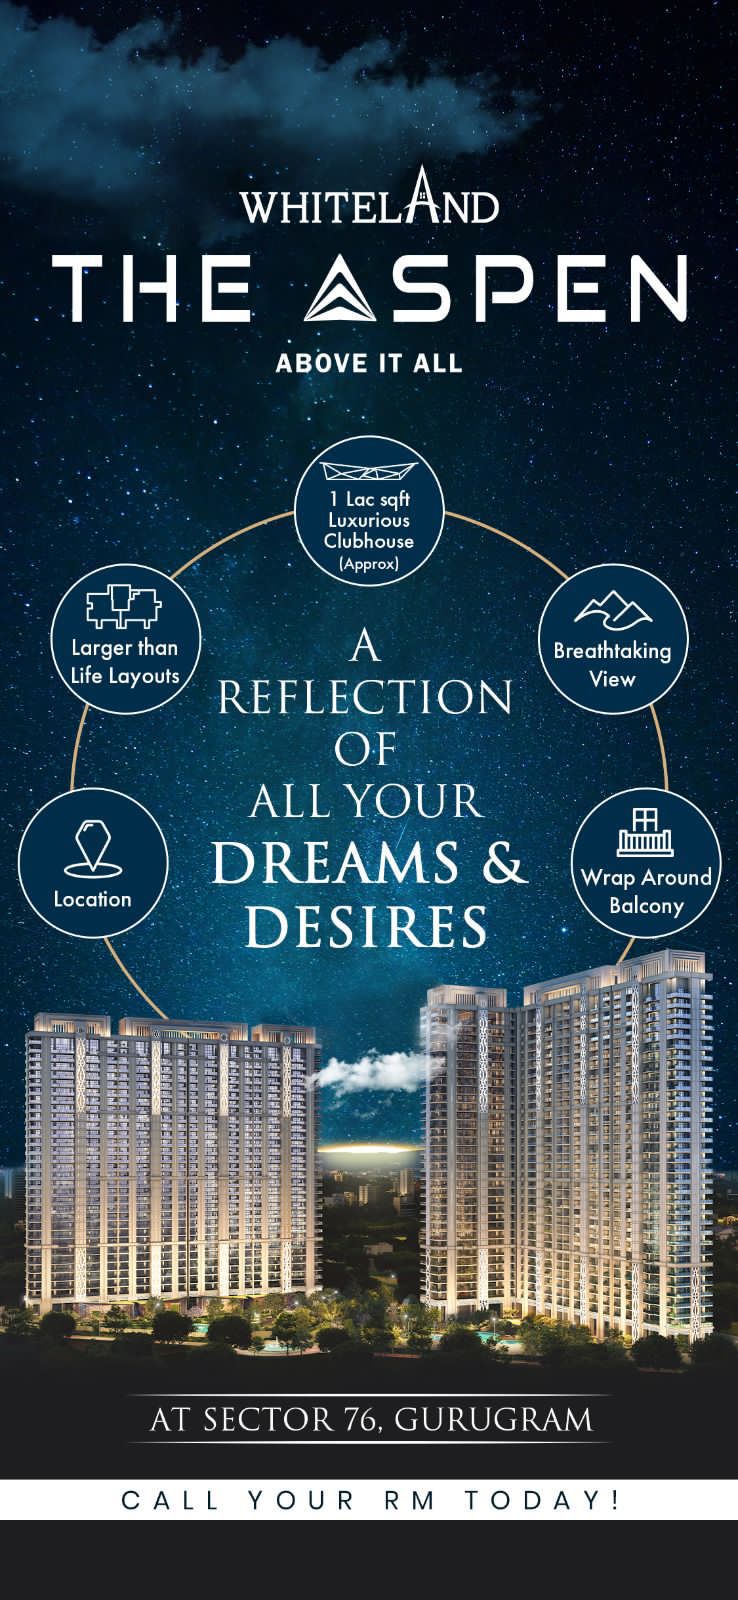 A reflection of all your dreams and desires at Whiteland The Aspen in Sector 76, Gurgaon Update